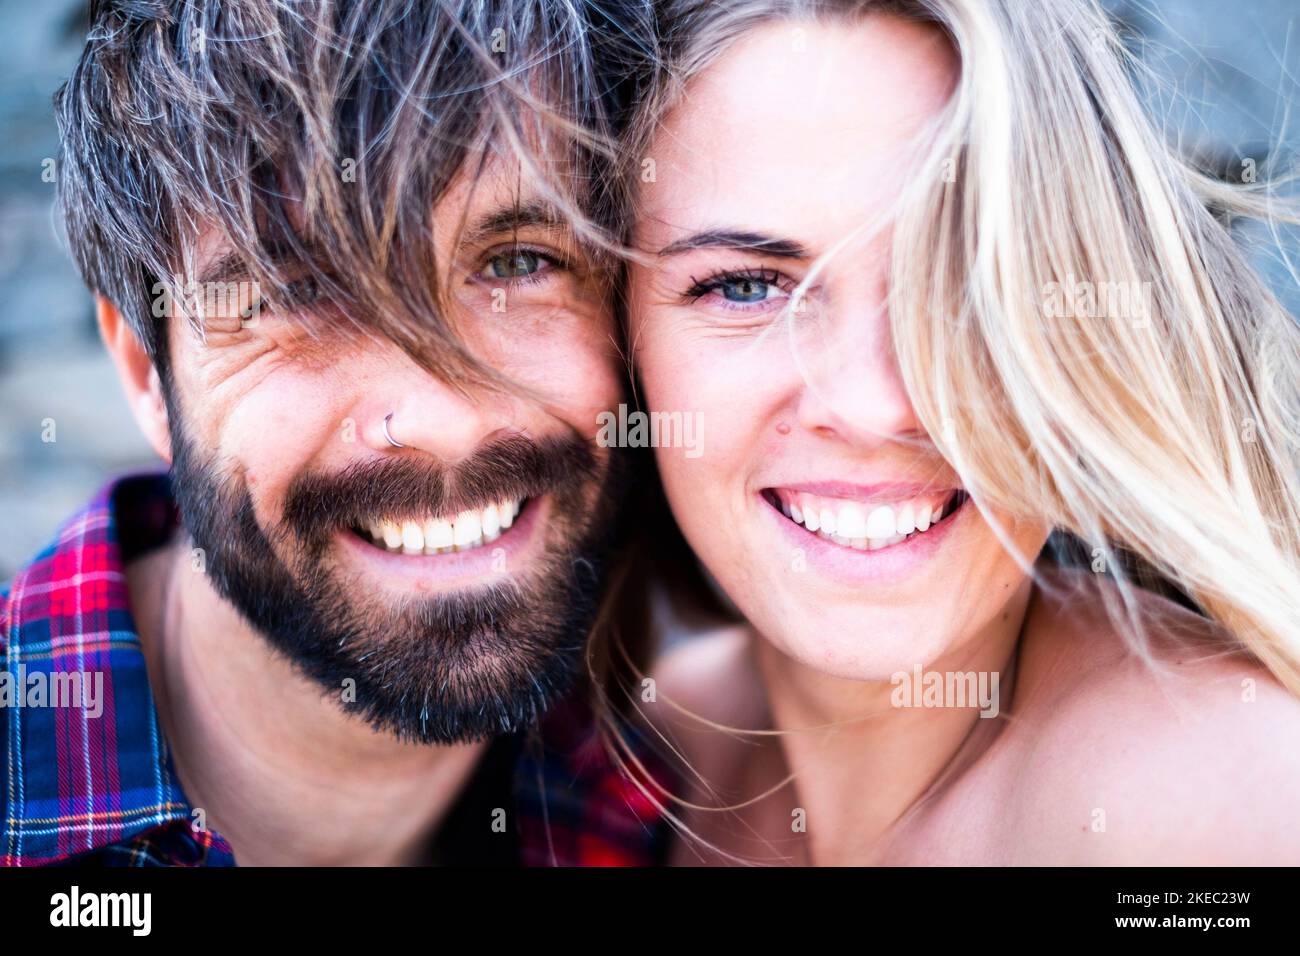 close up and portrait of beautiful and handsome man and woman togethe with their faces near each other looking at the camera smiling - blone woman with blue eyes and handsome man with green eyes Stock Photo